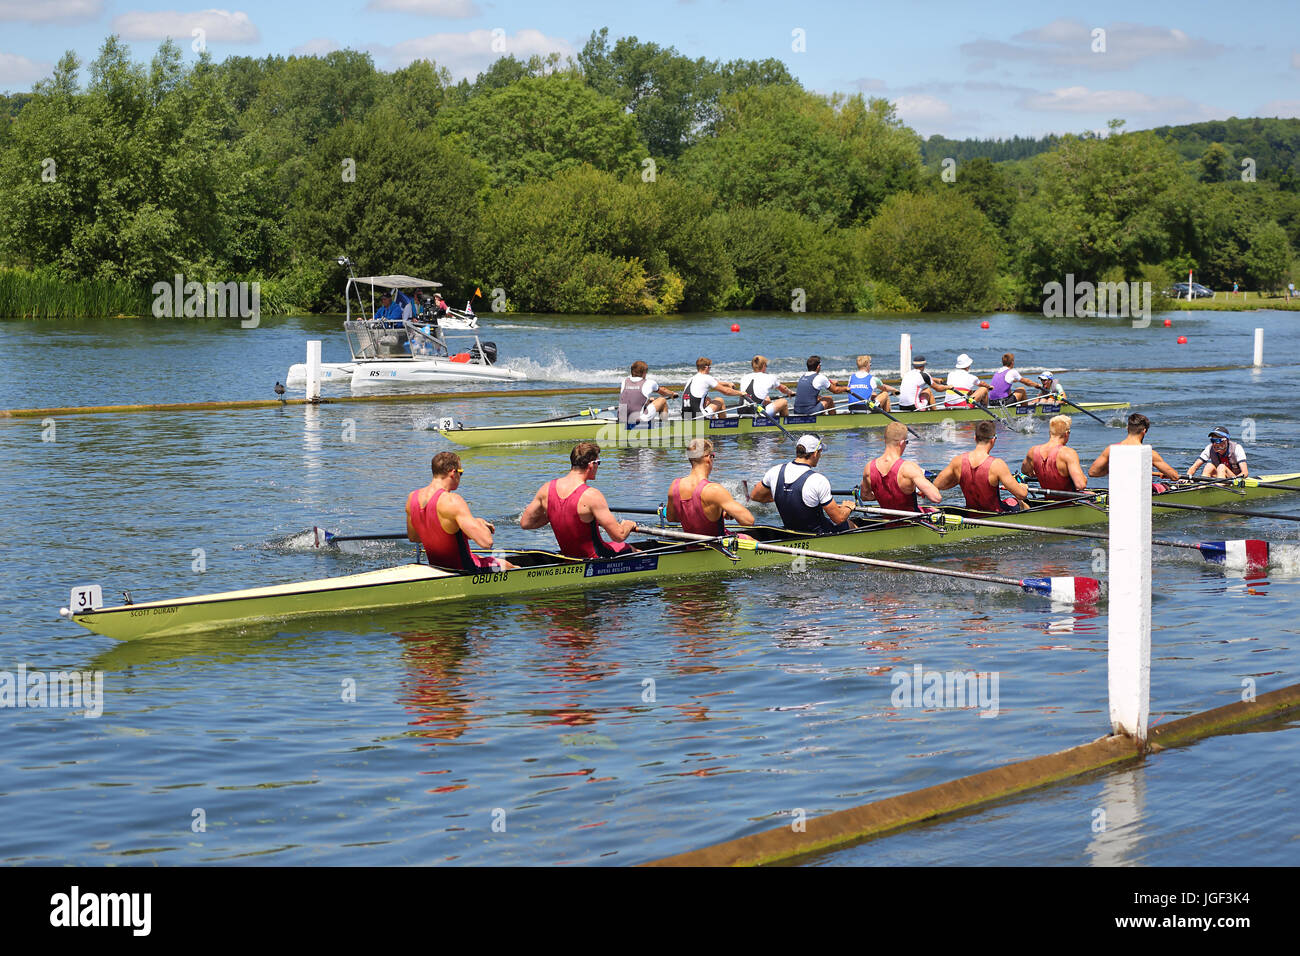 Oxford Brookes beat Molesey in the Ladies Challenge Plate final at Henley Royal Regatta 2017 Stock Photo